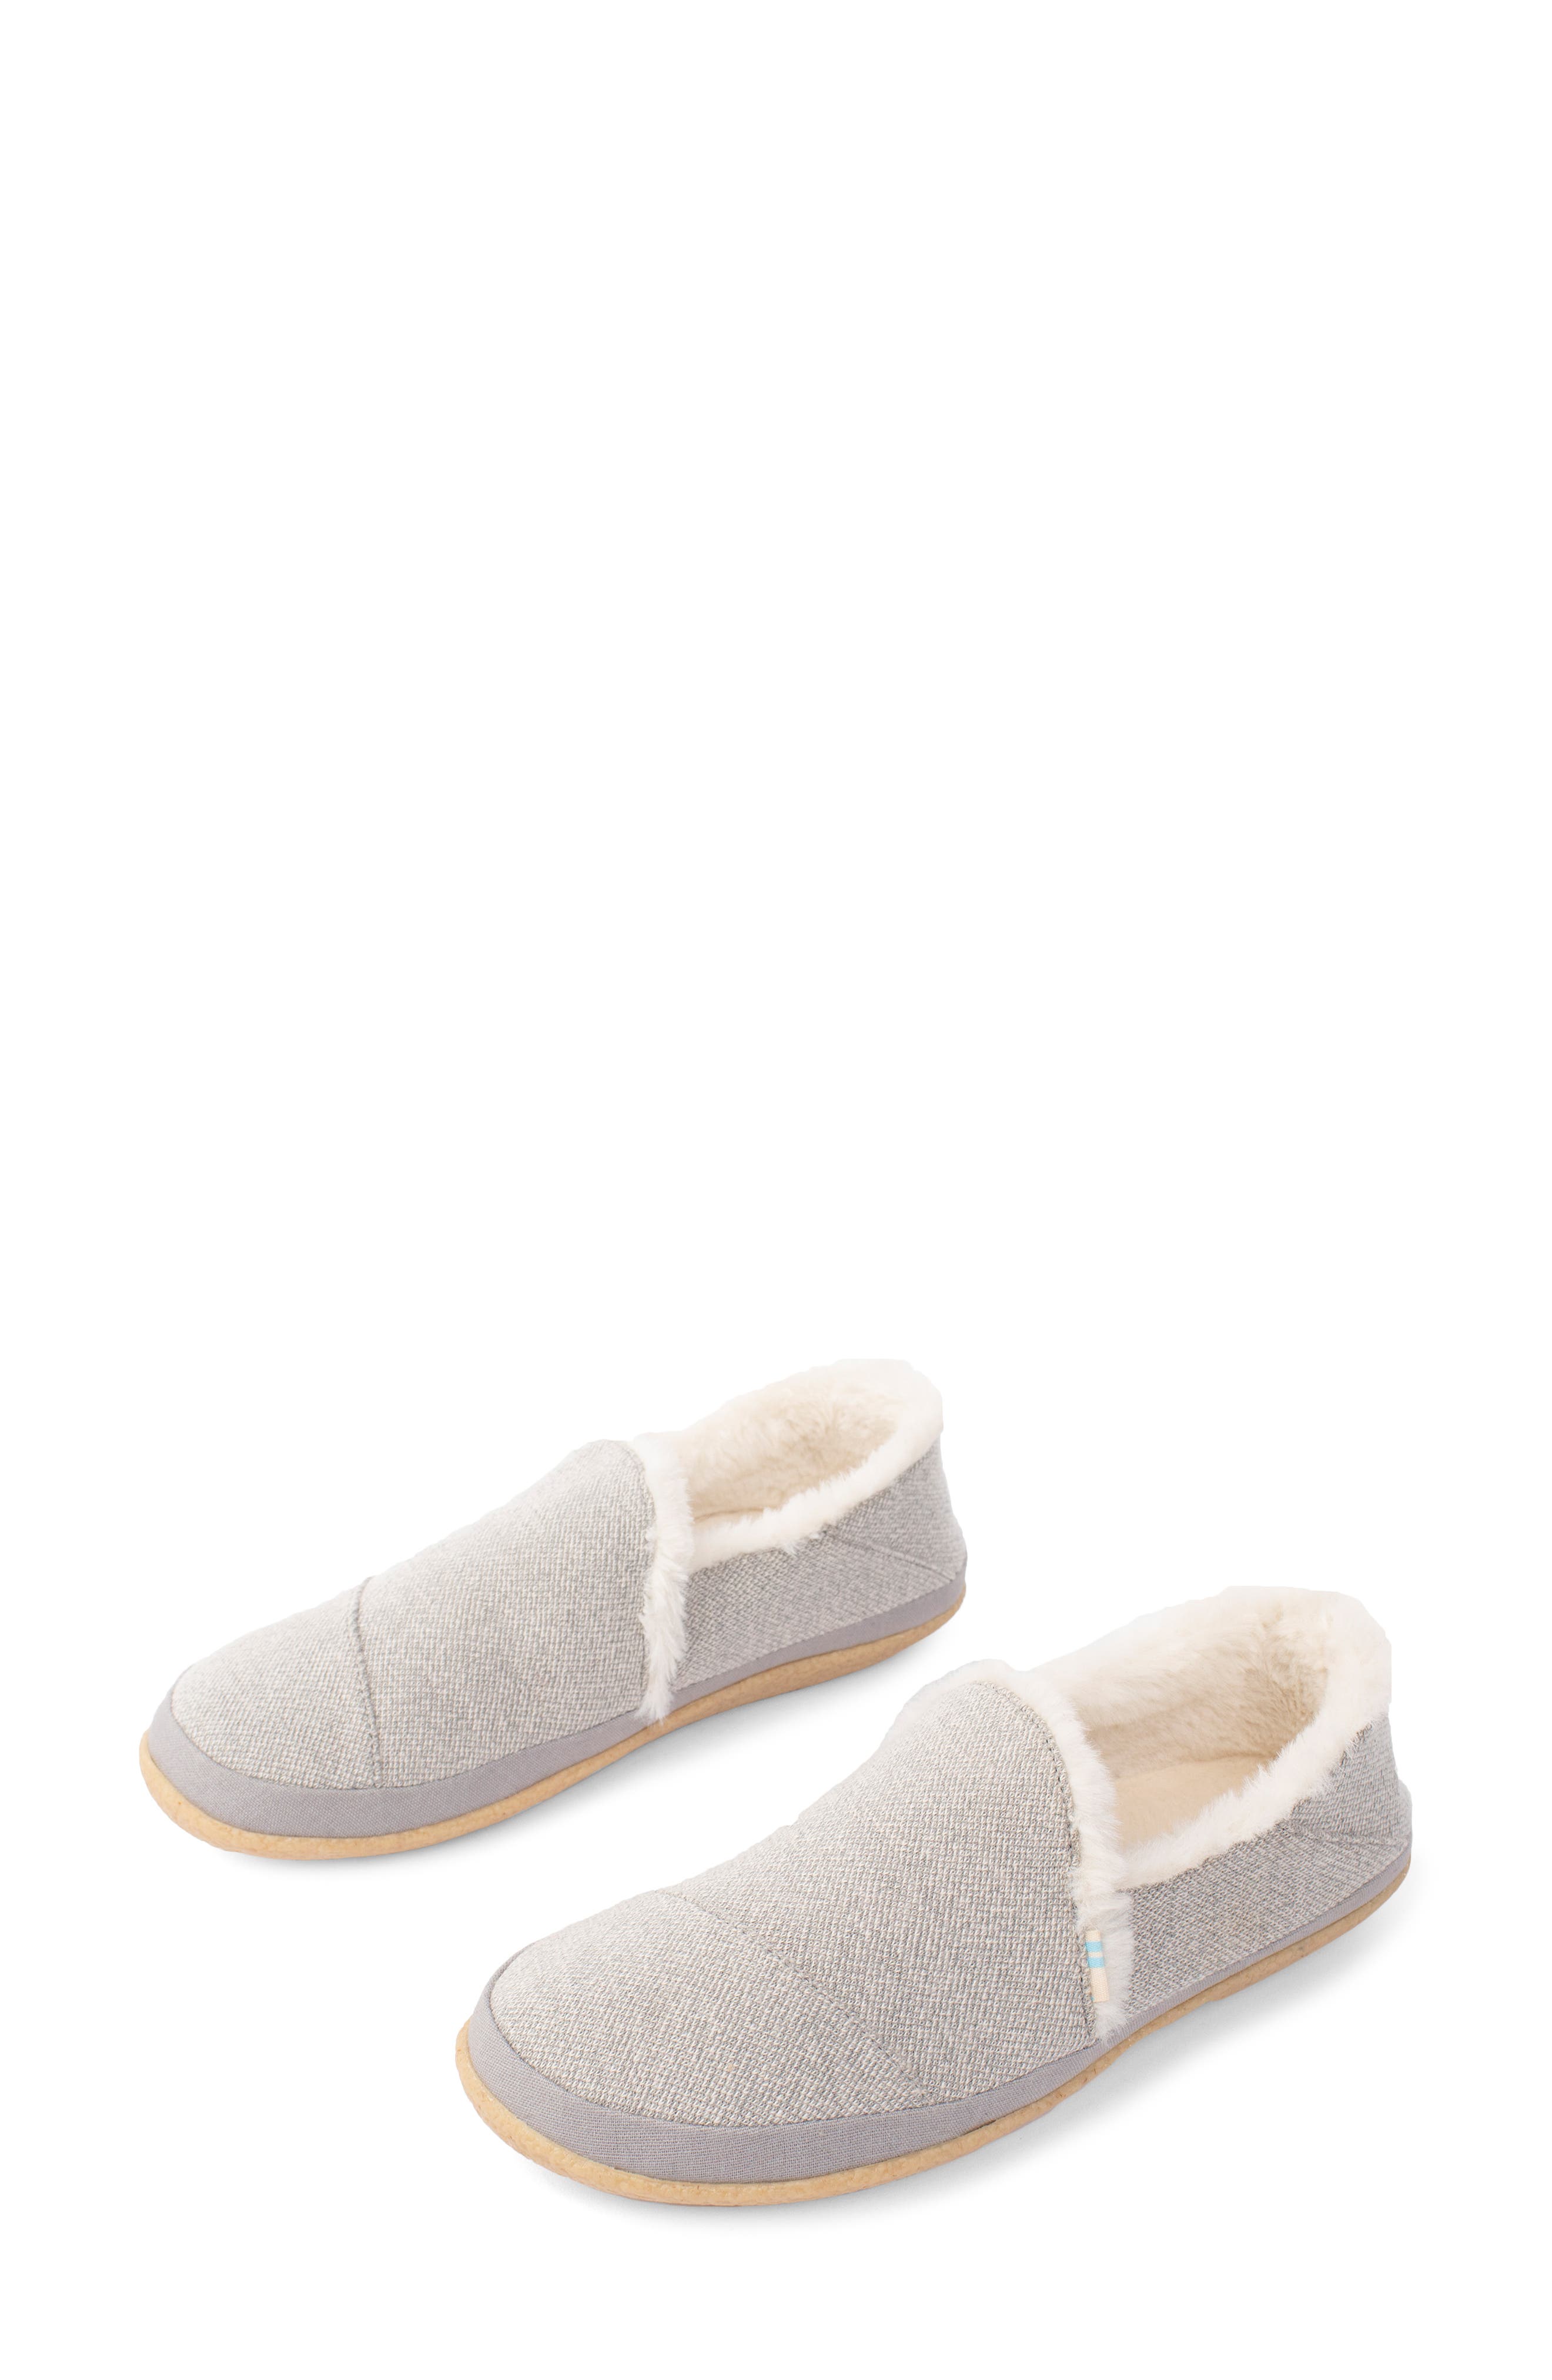 toms boys slippers